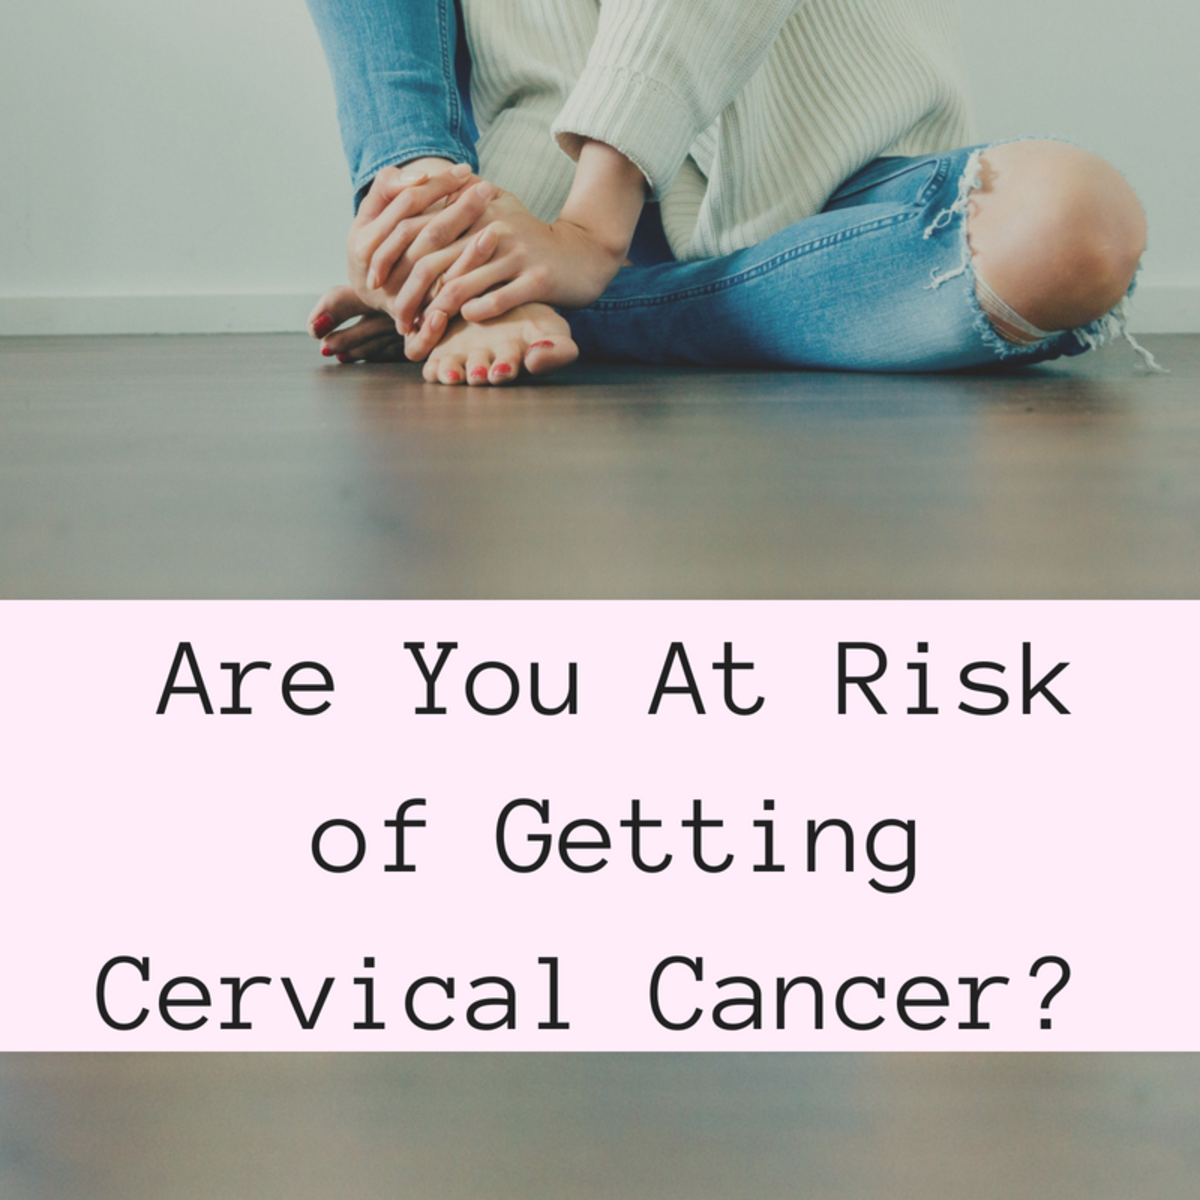 Are You at Risk of Getting Cervical Cancer?